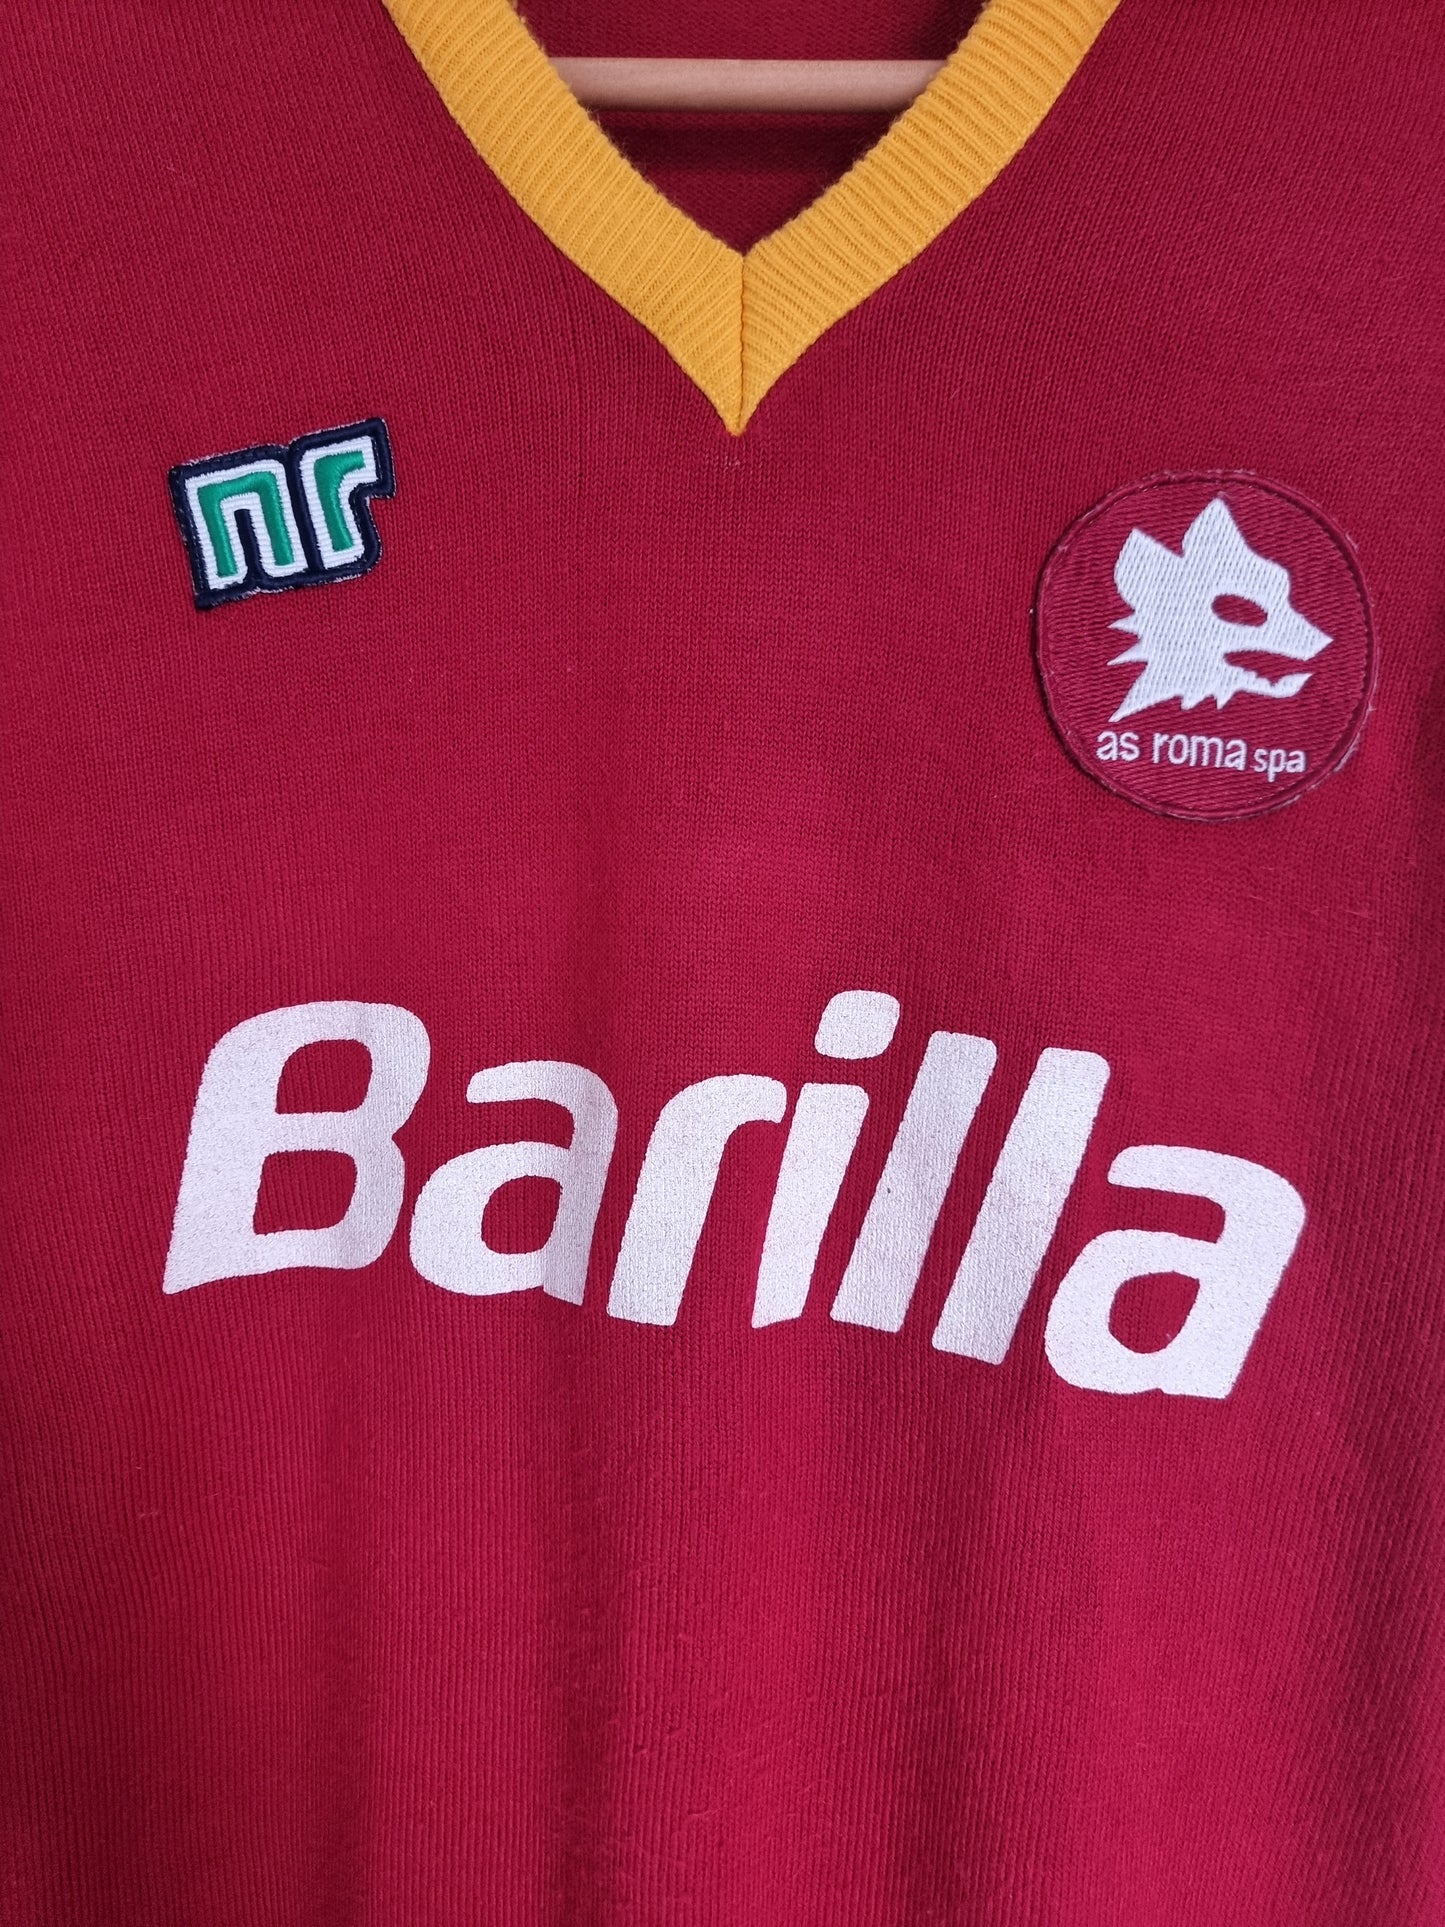 Ennerre Roma 87/88 '7 (Conti) Long Sleeve Match Issue Home Shirt Large